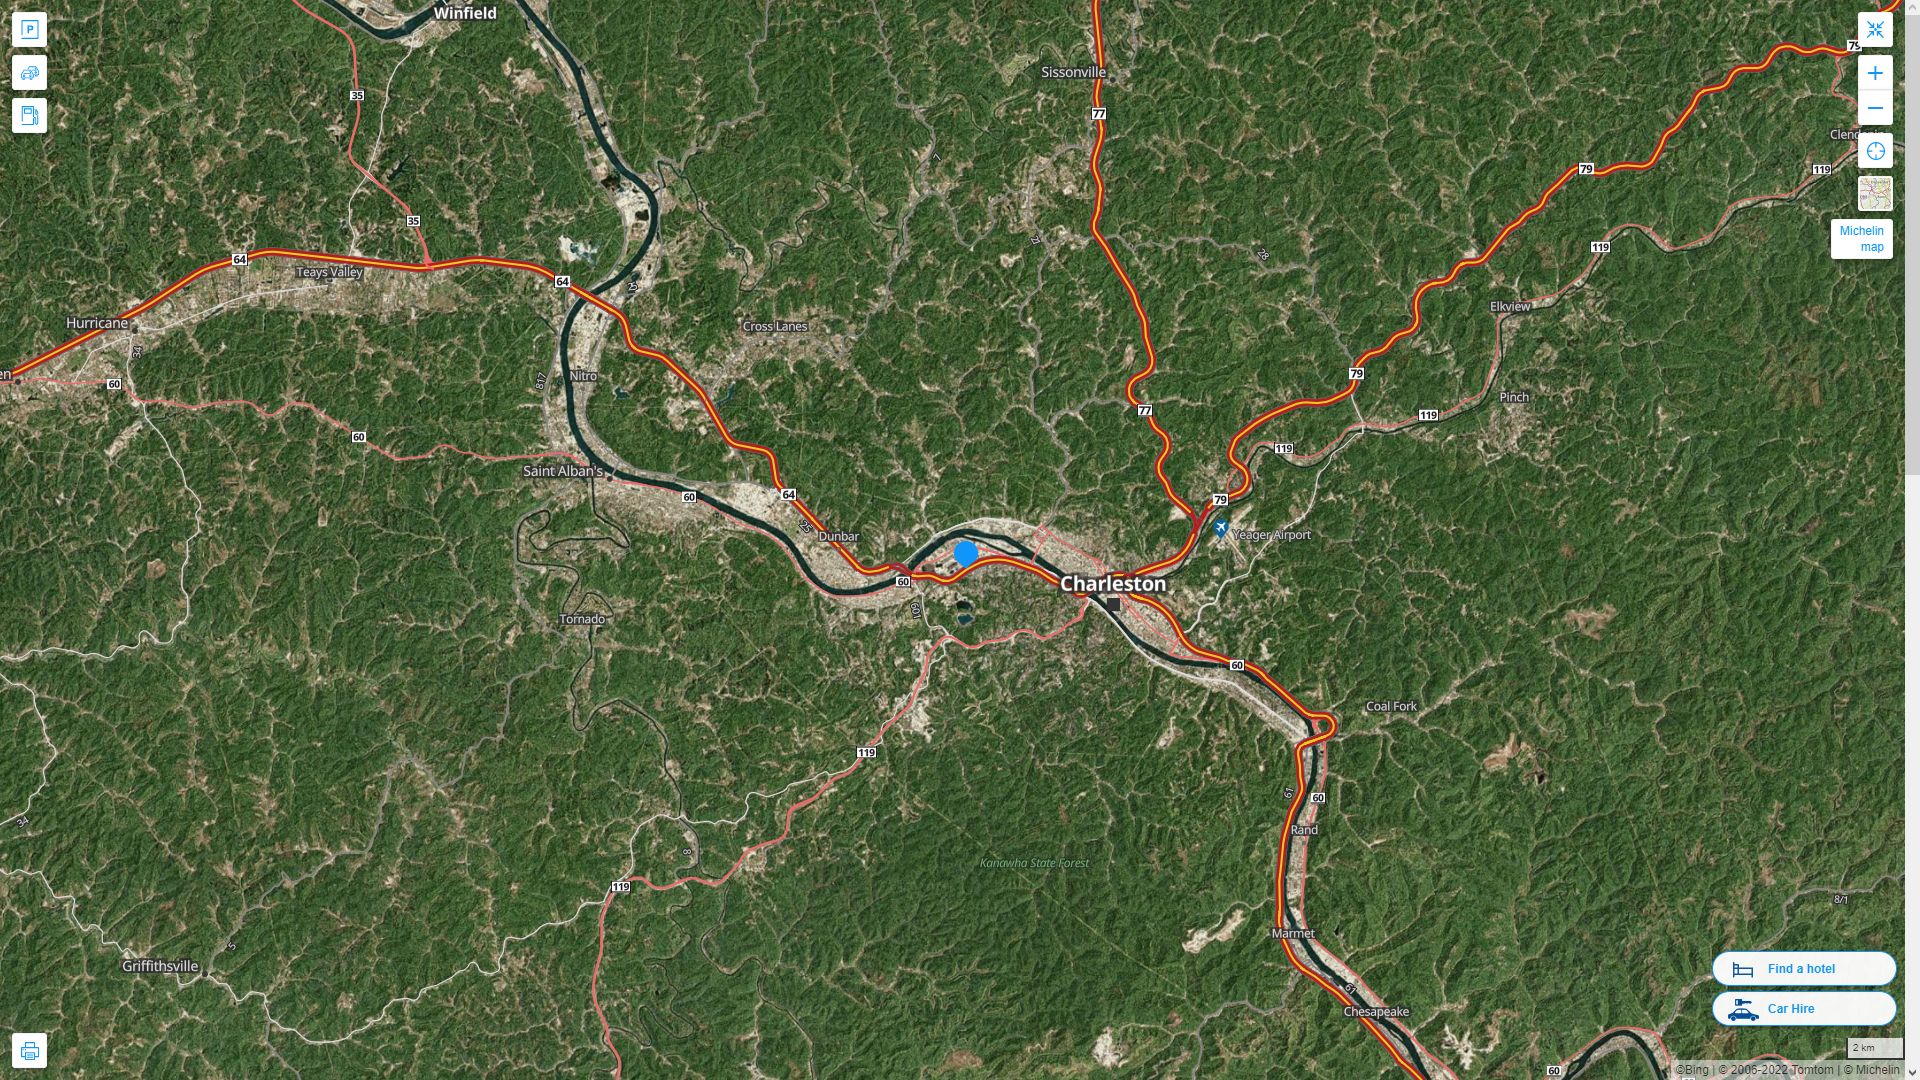 South Charleston West Virginia Highway and Road Map with Satellite View